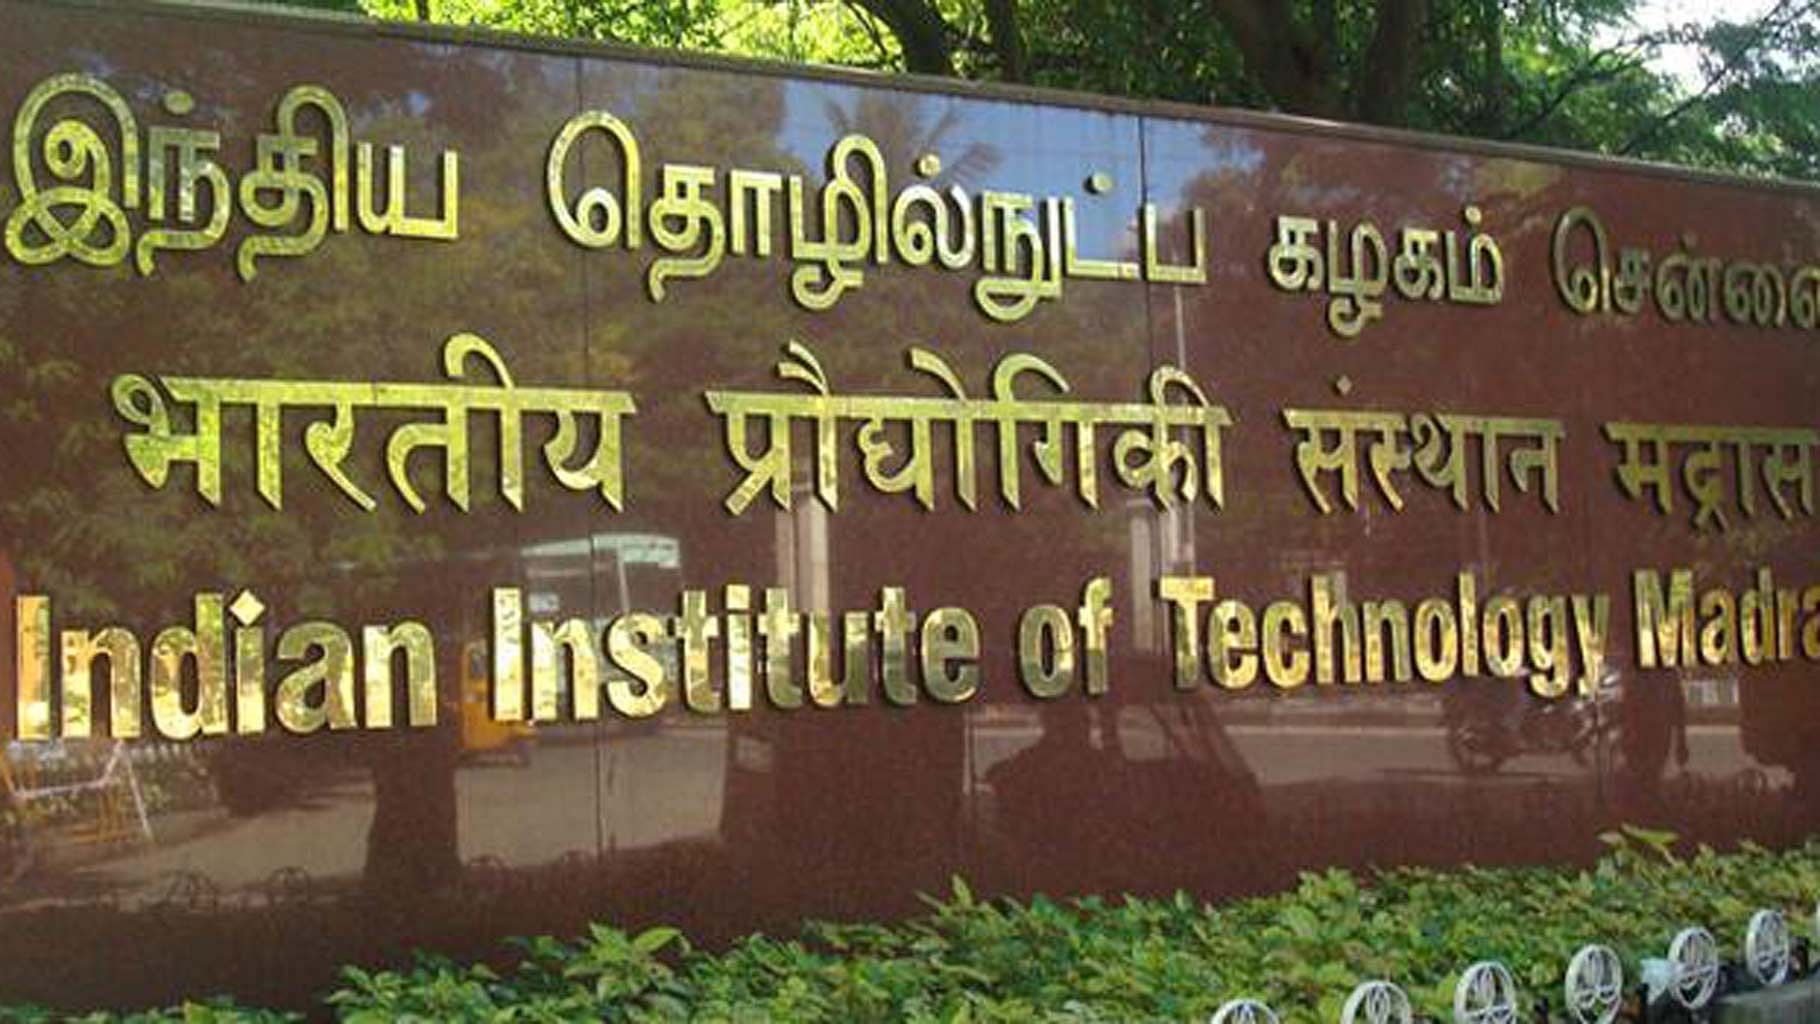 Indian Institute of Technology Madras. 